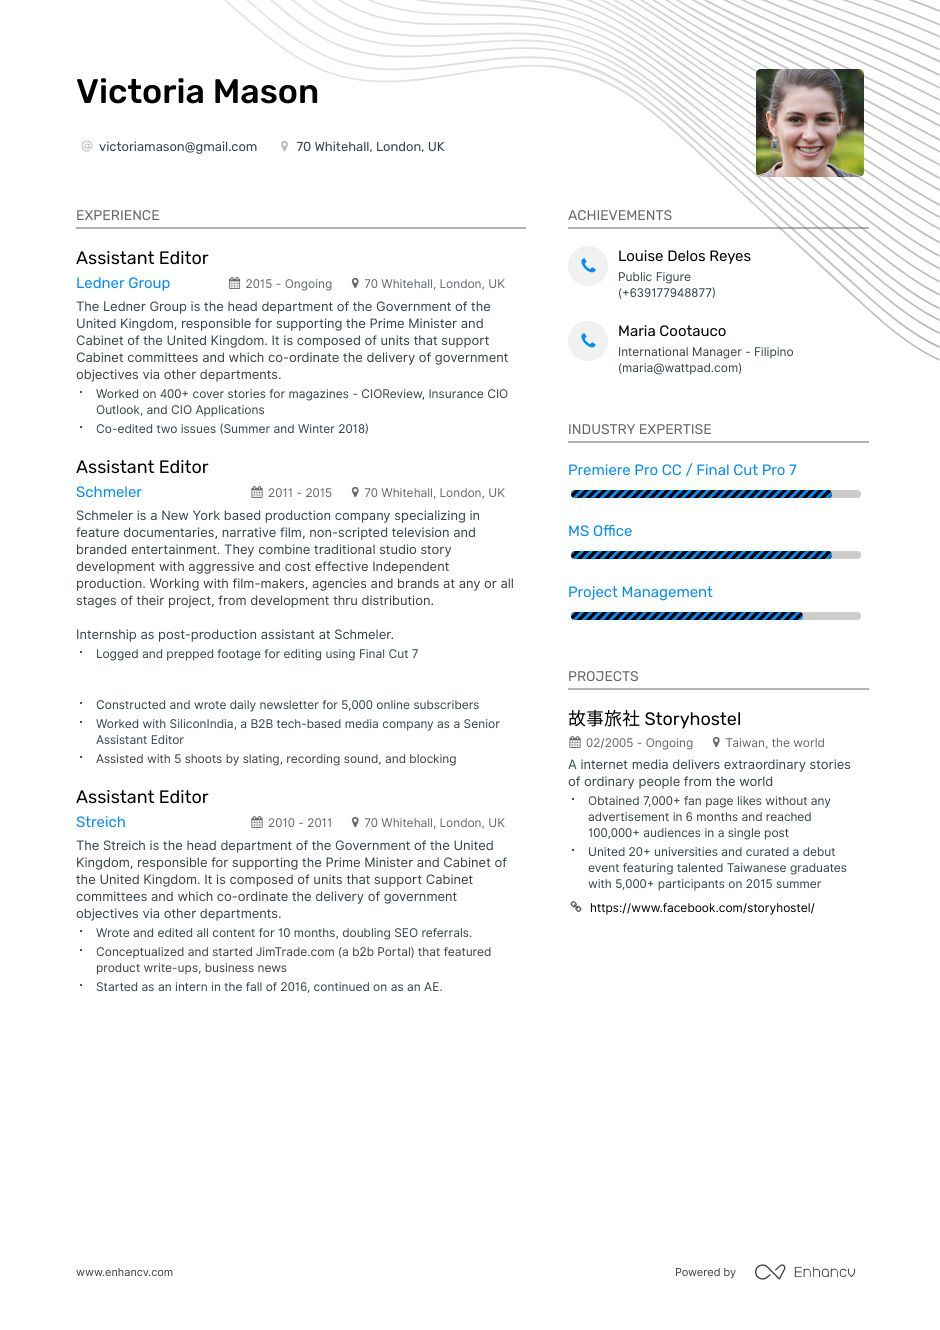 Assistant Editor Resume Example And Guide For 2019 Resume Examples Resume Resume Templates